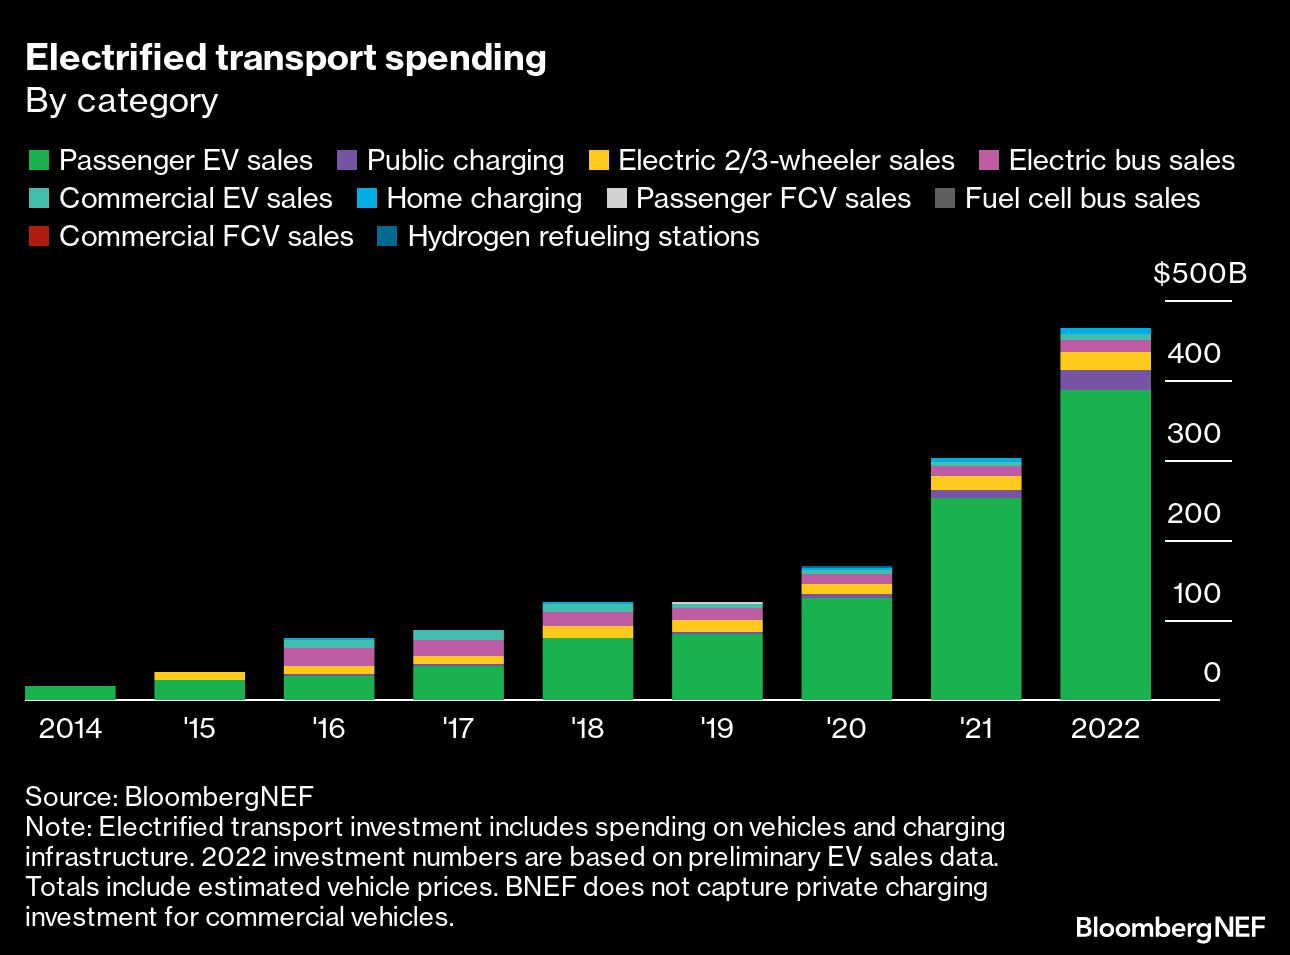 Electrified transport spending by category